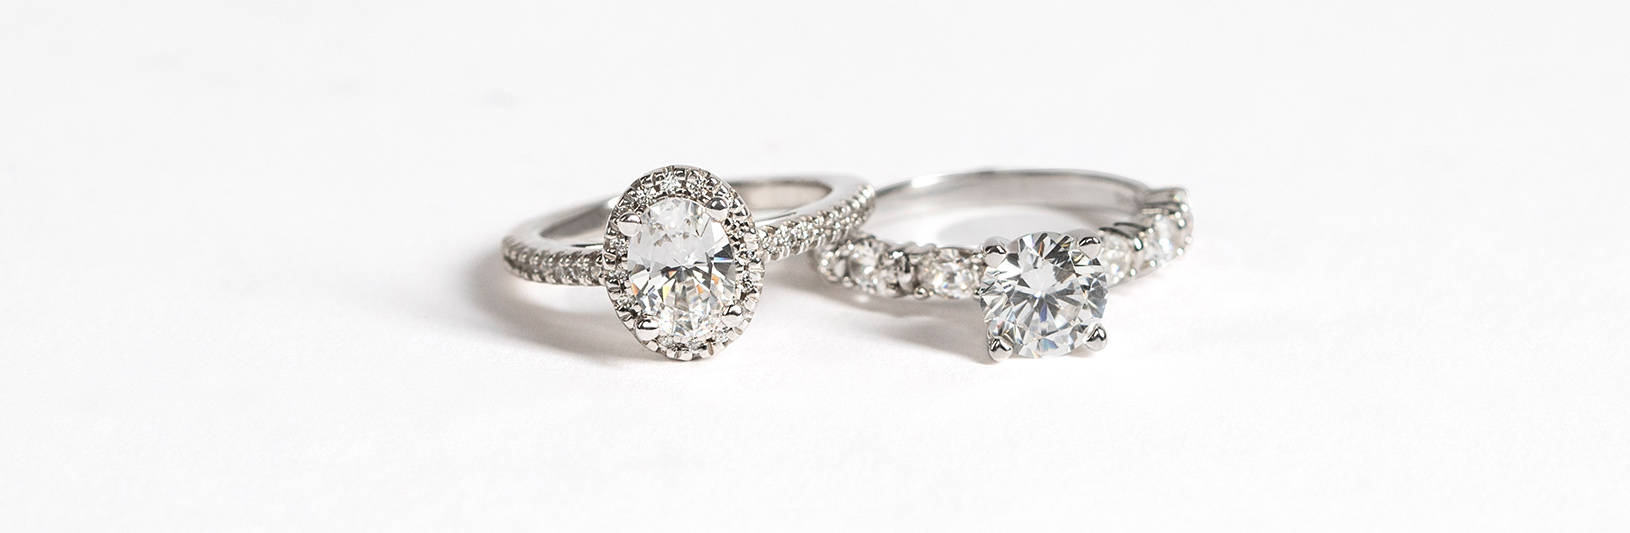 Two engagement rings compared side by side